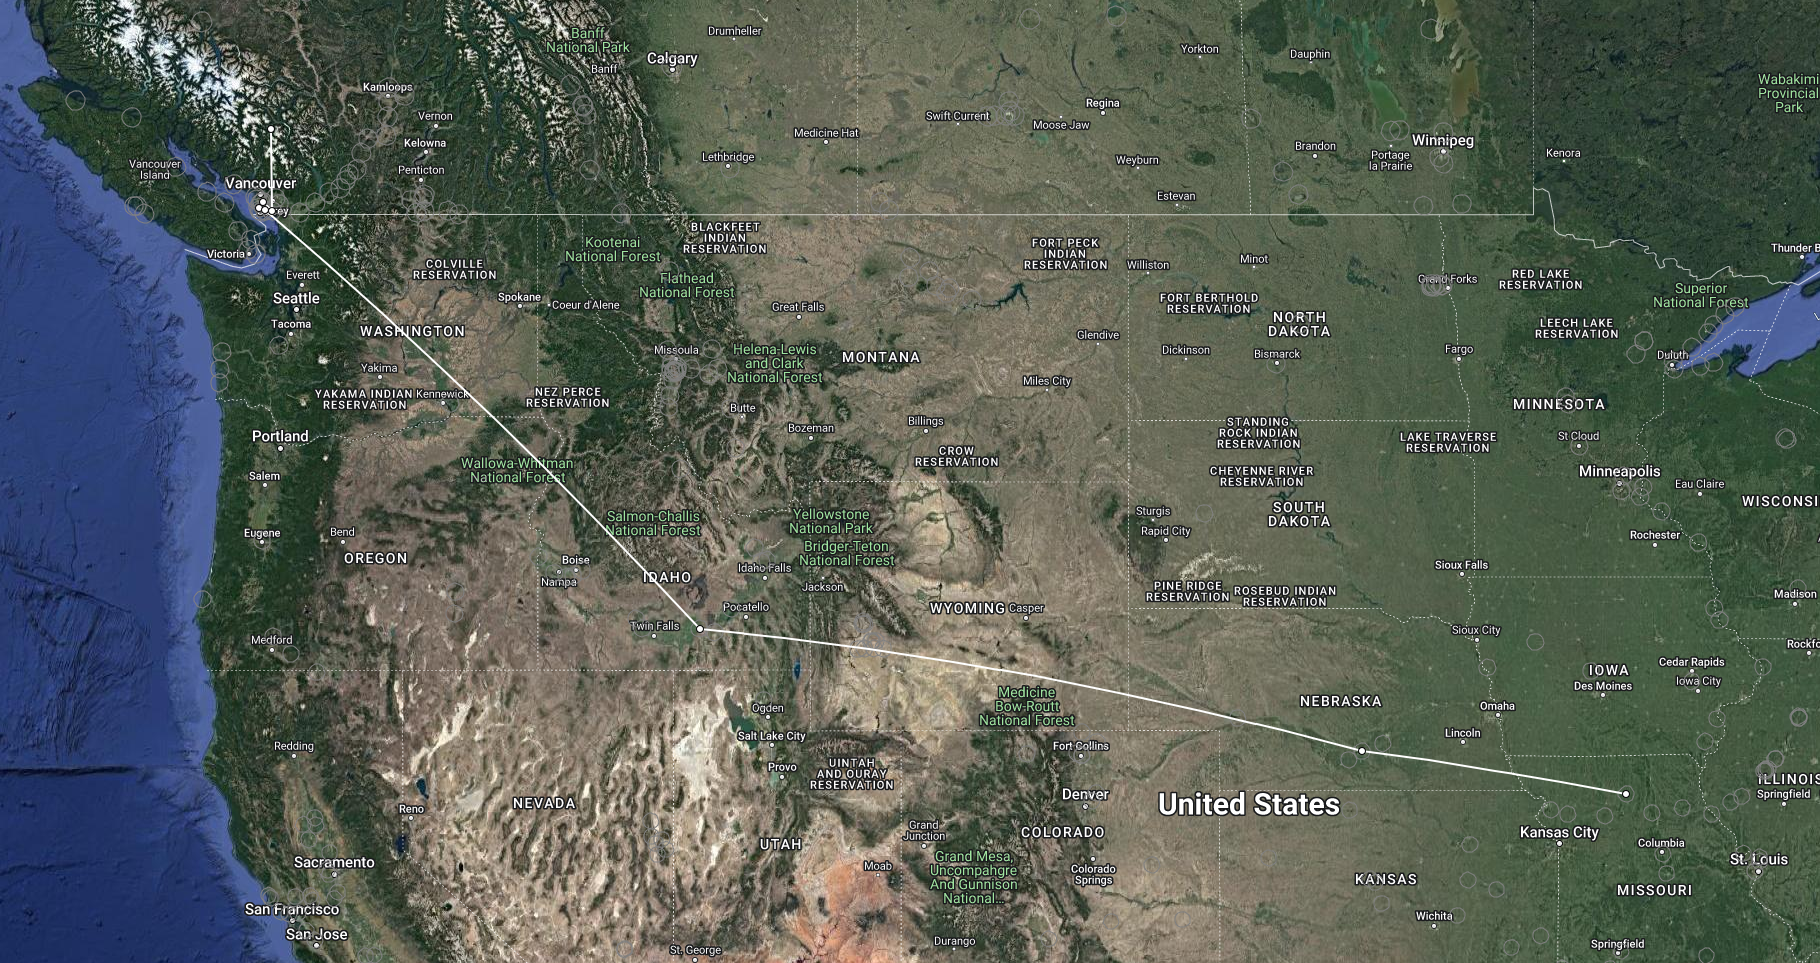 a satellite map showing most of the lower 48 shows a line stretching from near Vancouver, BC, to a point in southeastern Idaho, a point in central nebraska, and a point in northern Missouri